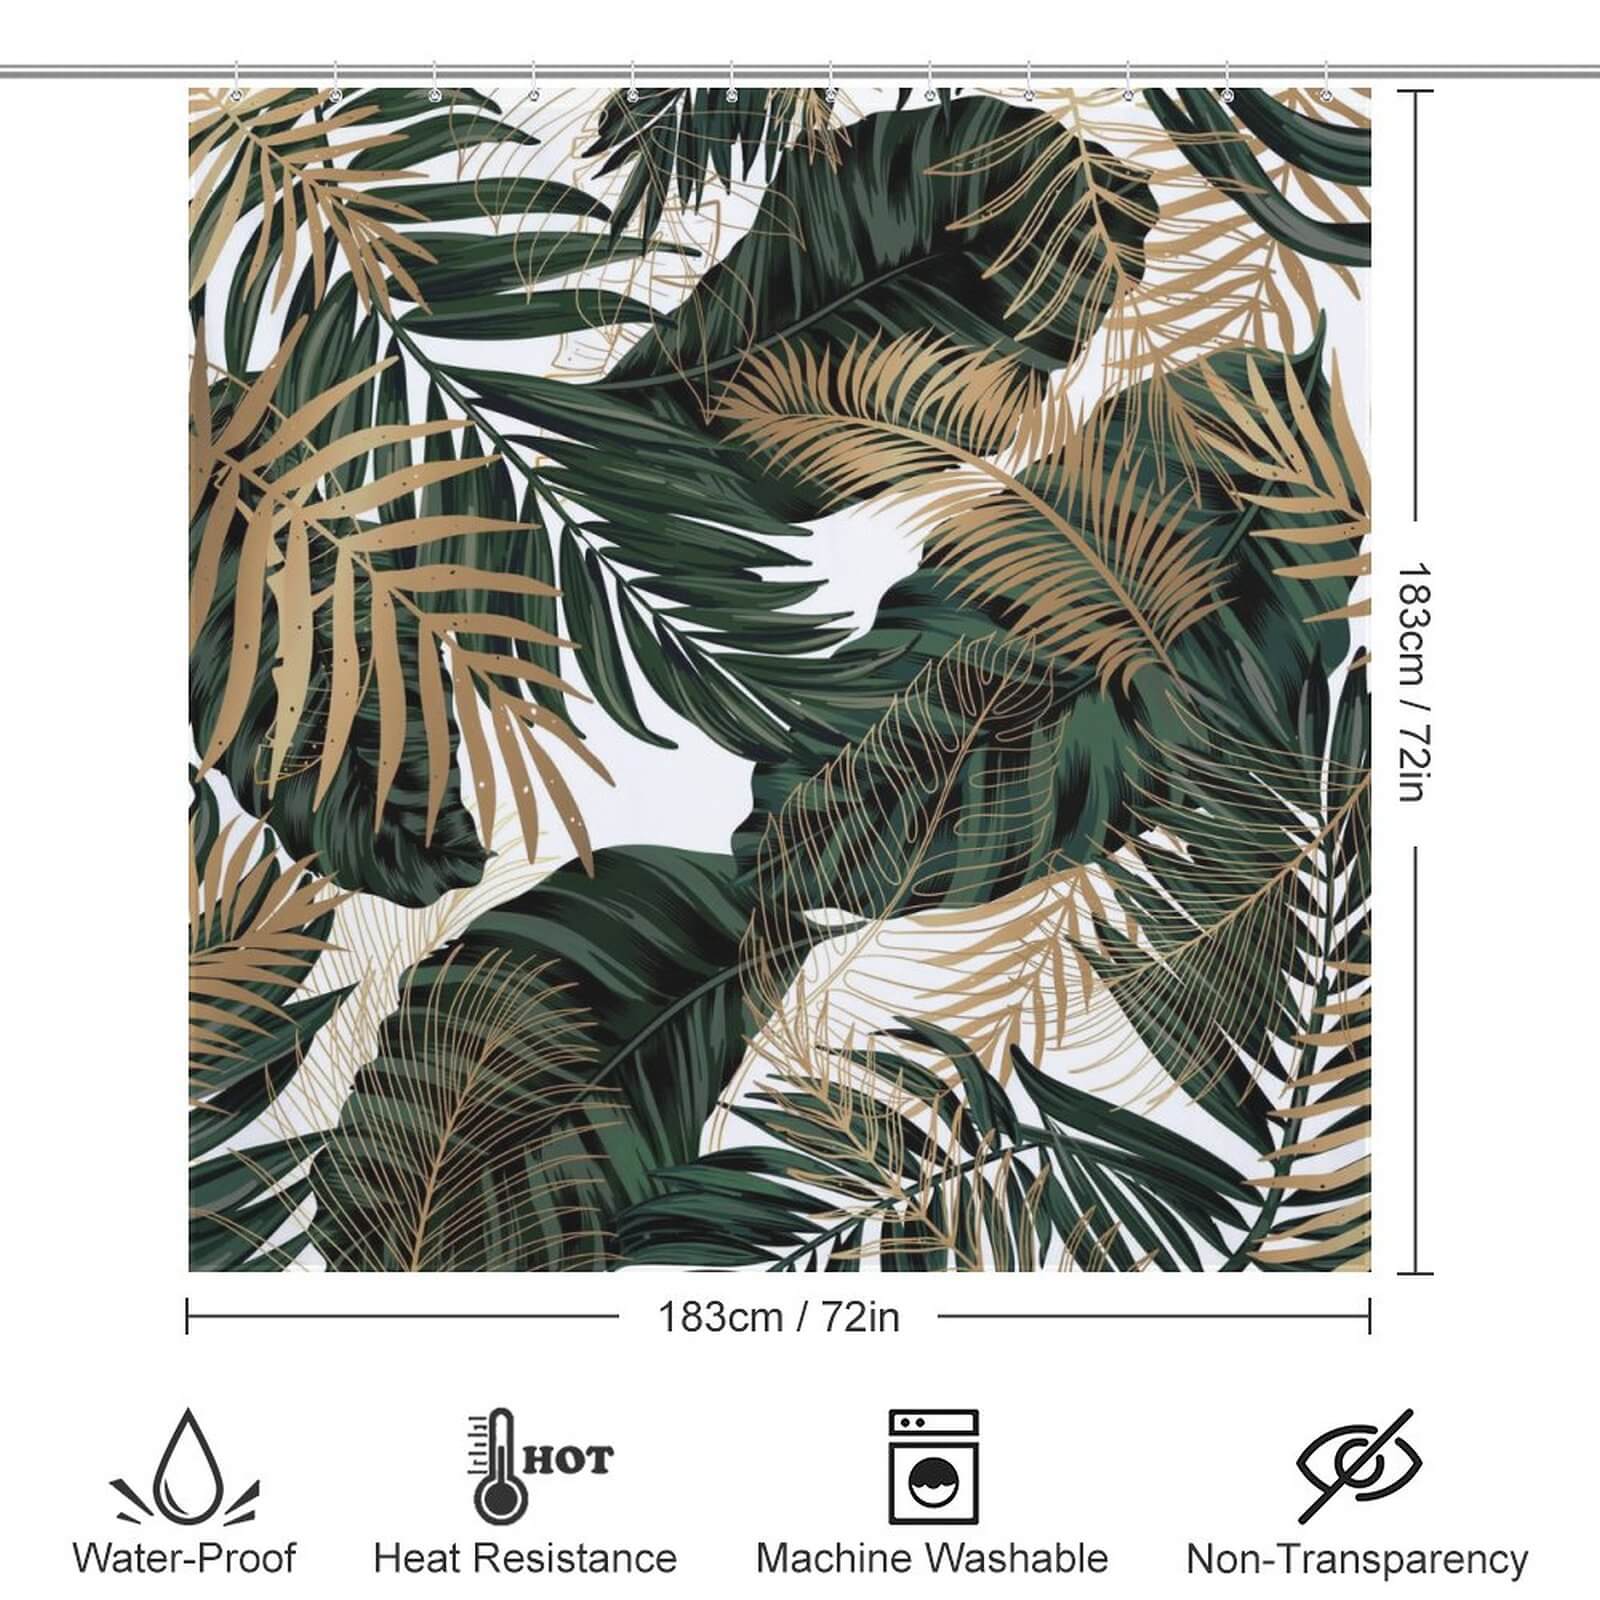 A Tropical Leaves Jungle Shower Curtain from Cotton Cat, perfect for bathroom decor.